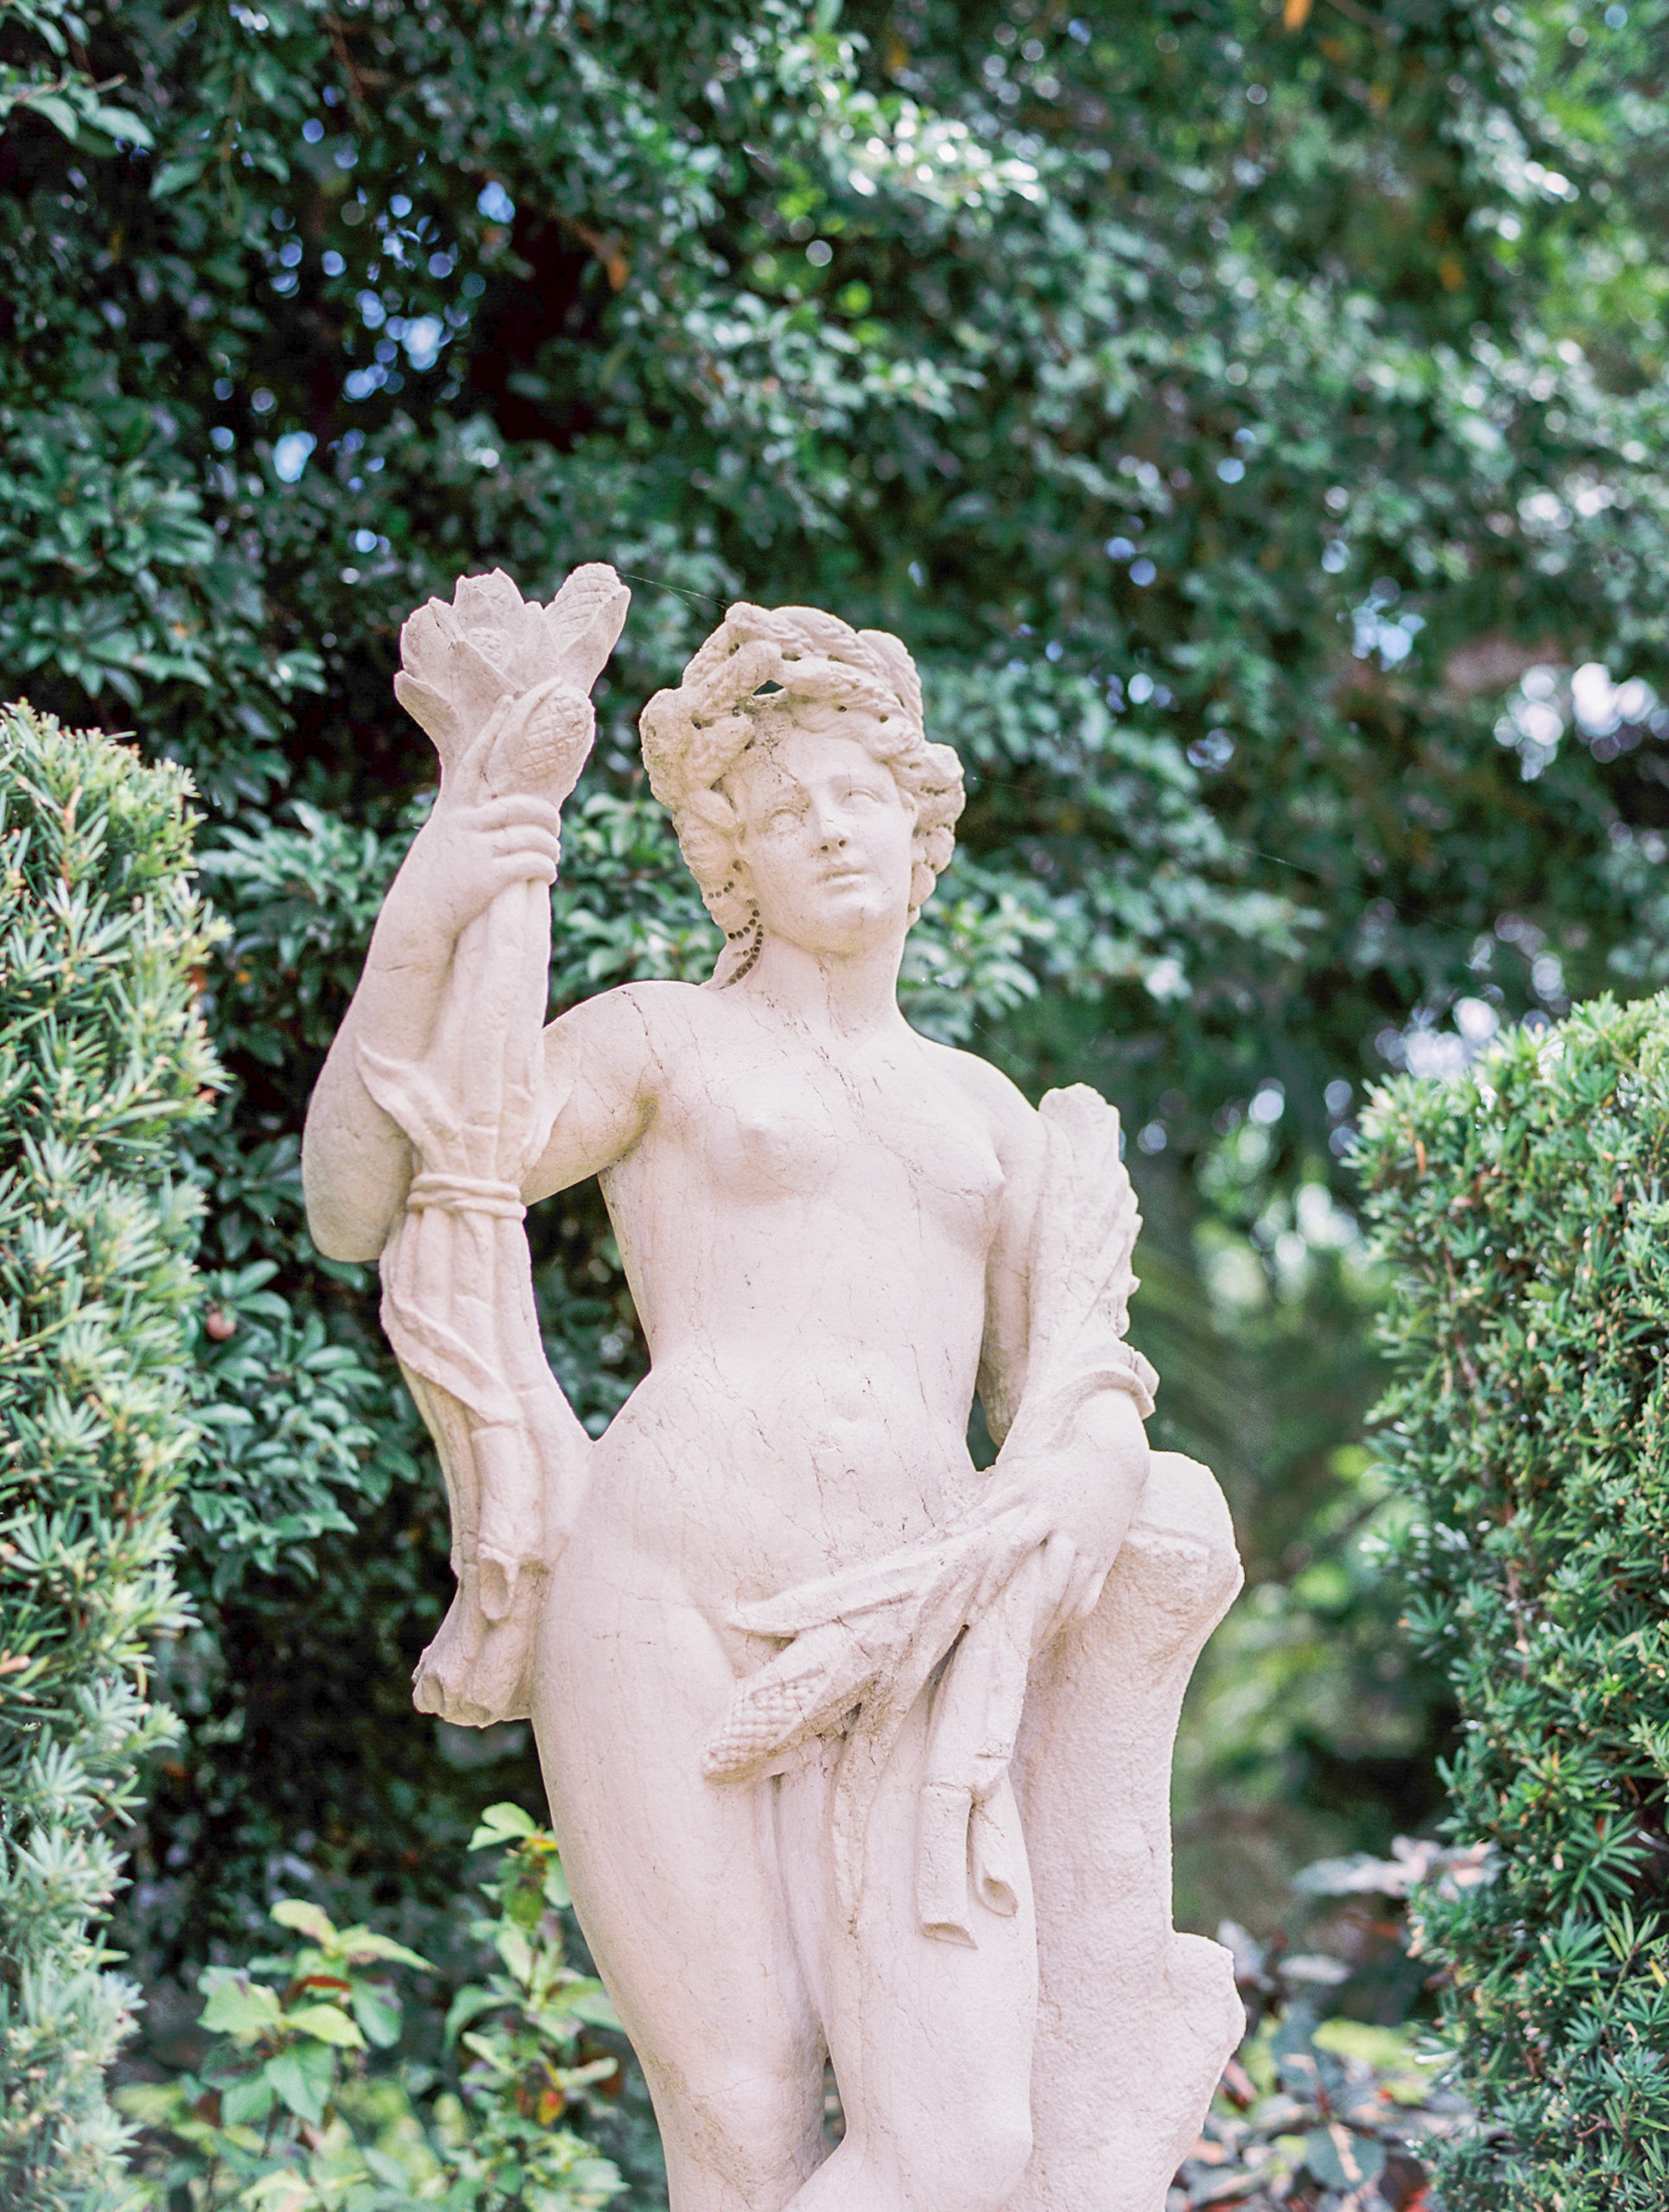 Statue at Vizcaya Museum surrounded by greenery